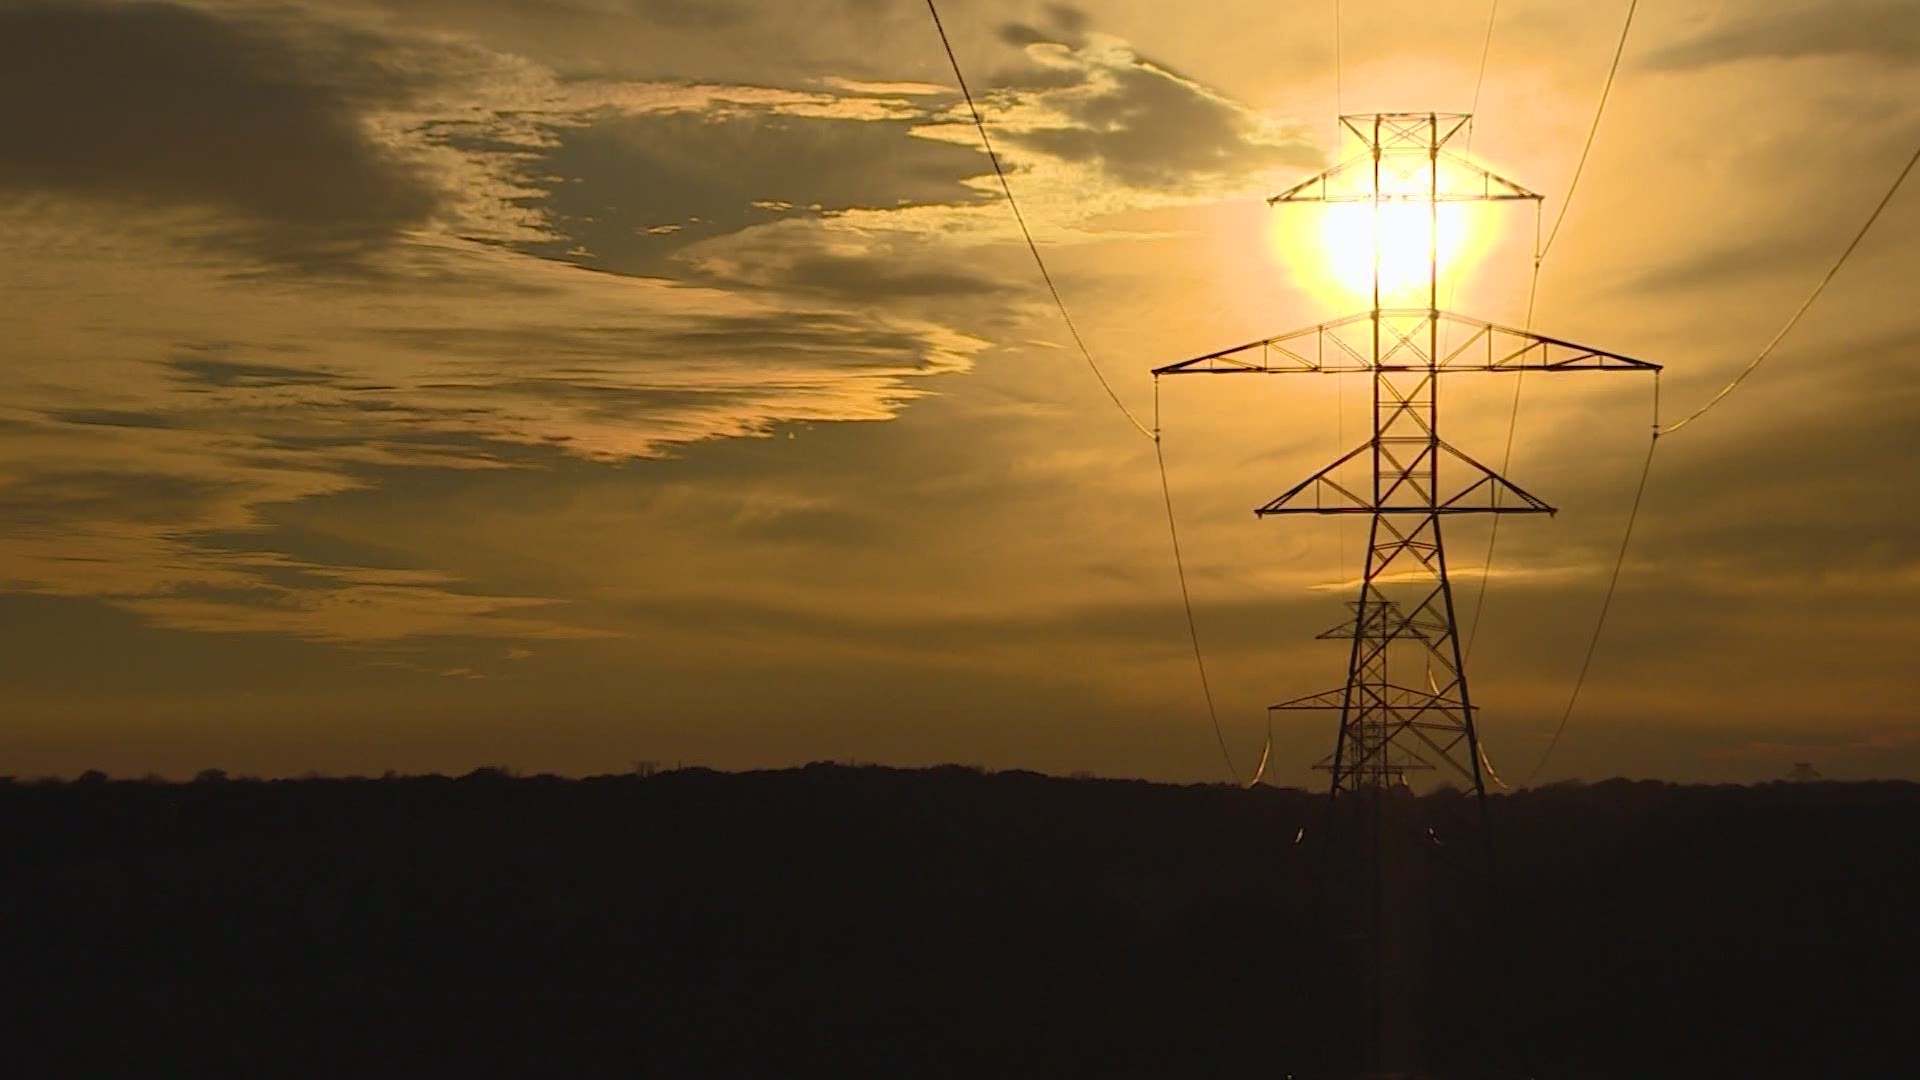 ERCOT said it's a balancing act on how much maintenance to allow at one time. The Texas Public Utility Commission said it relies on ERCOT's expertise.